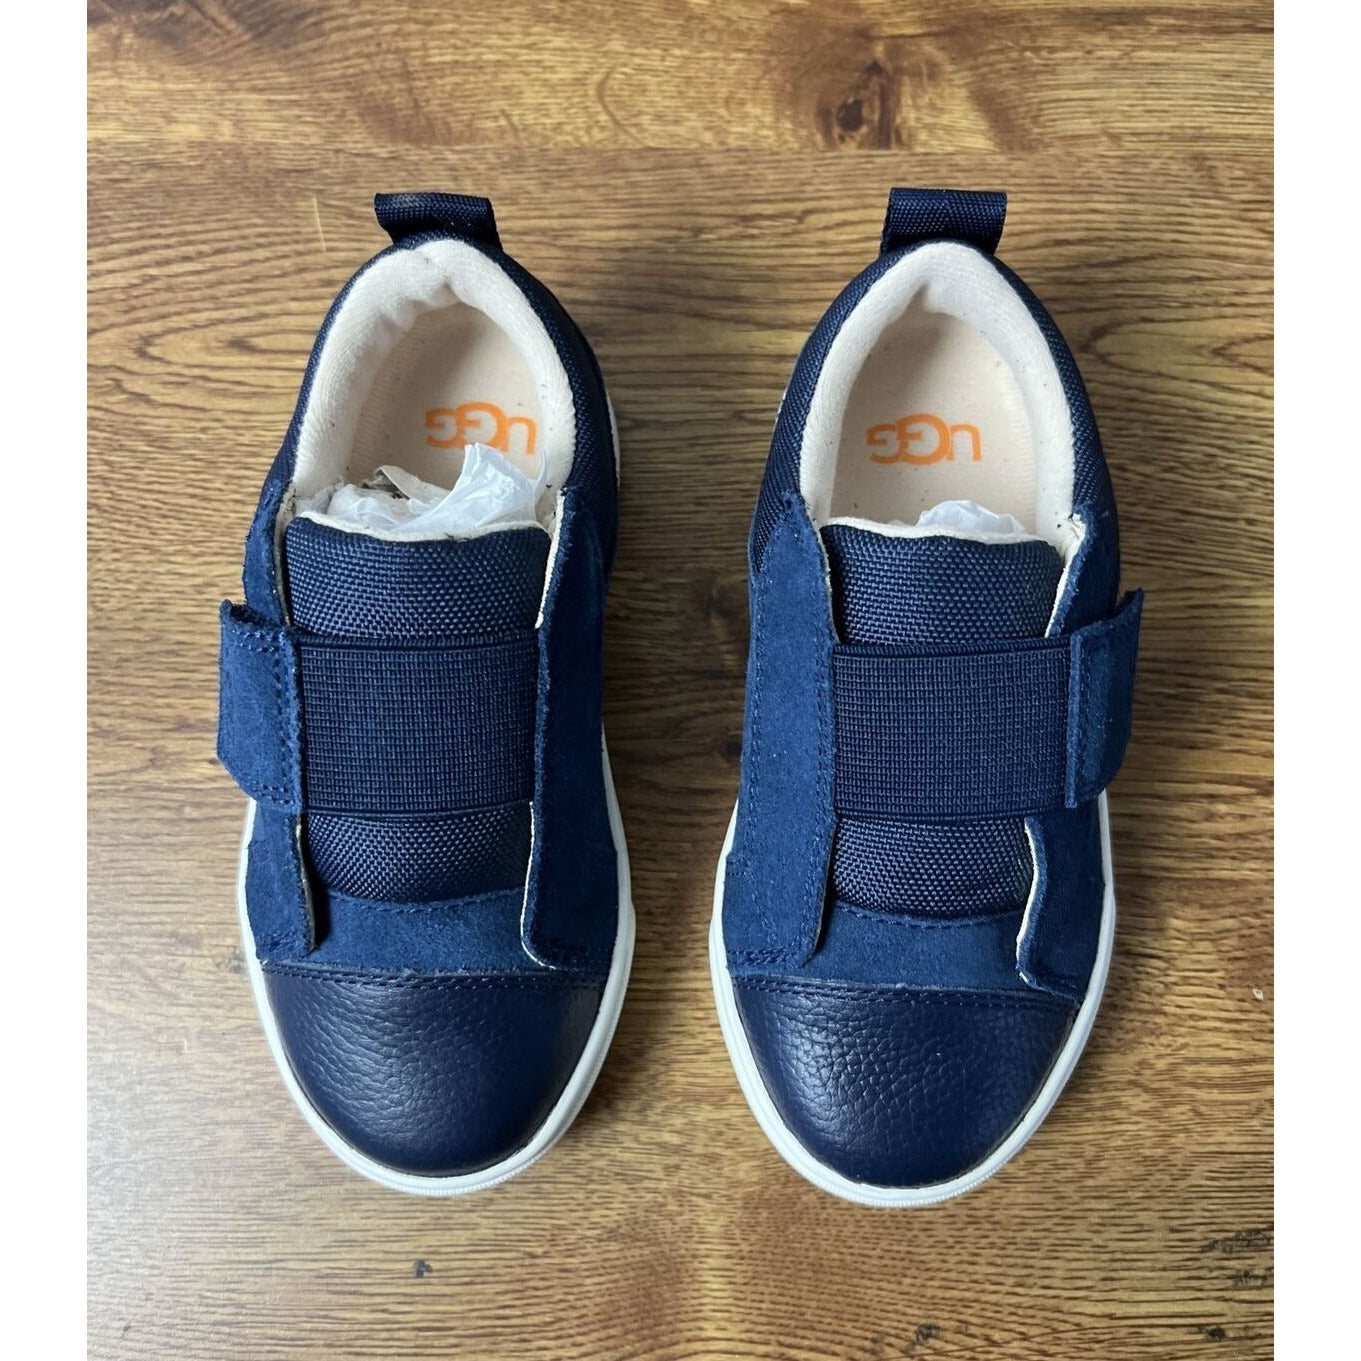 UGG RENNON LOW TOP SNEAKER BLUE TODDLER SHOES SIZE 9